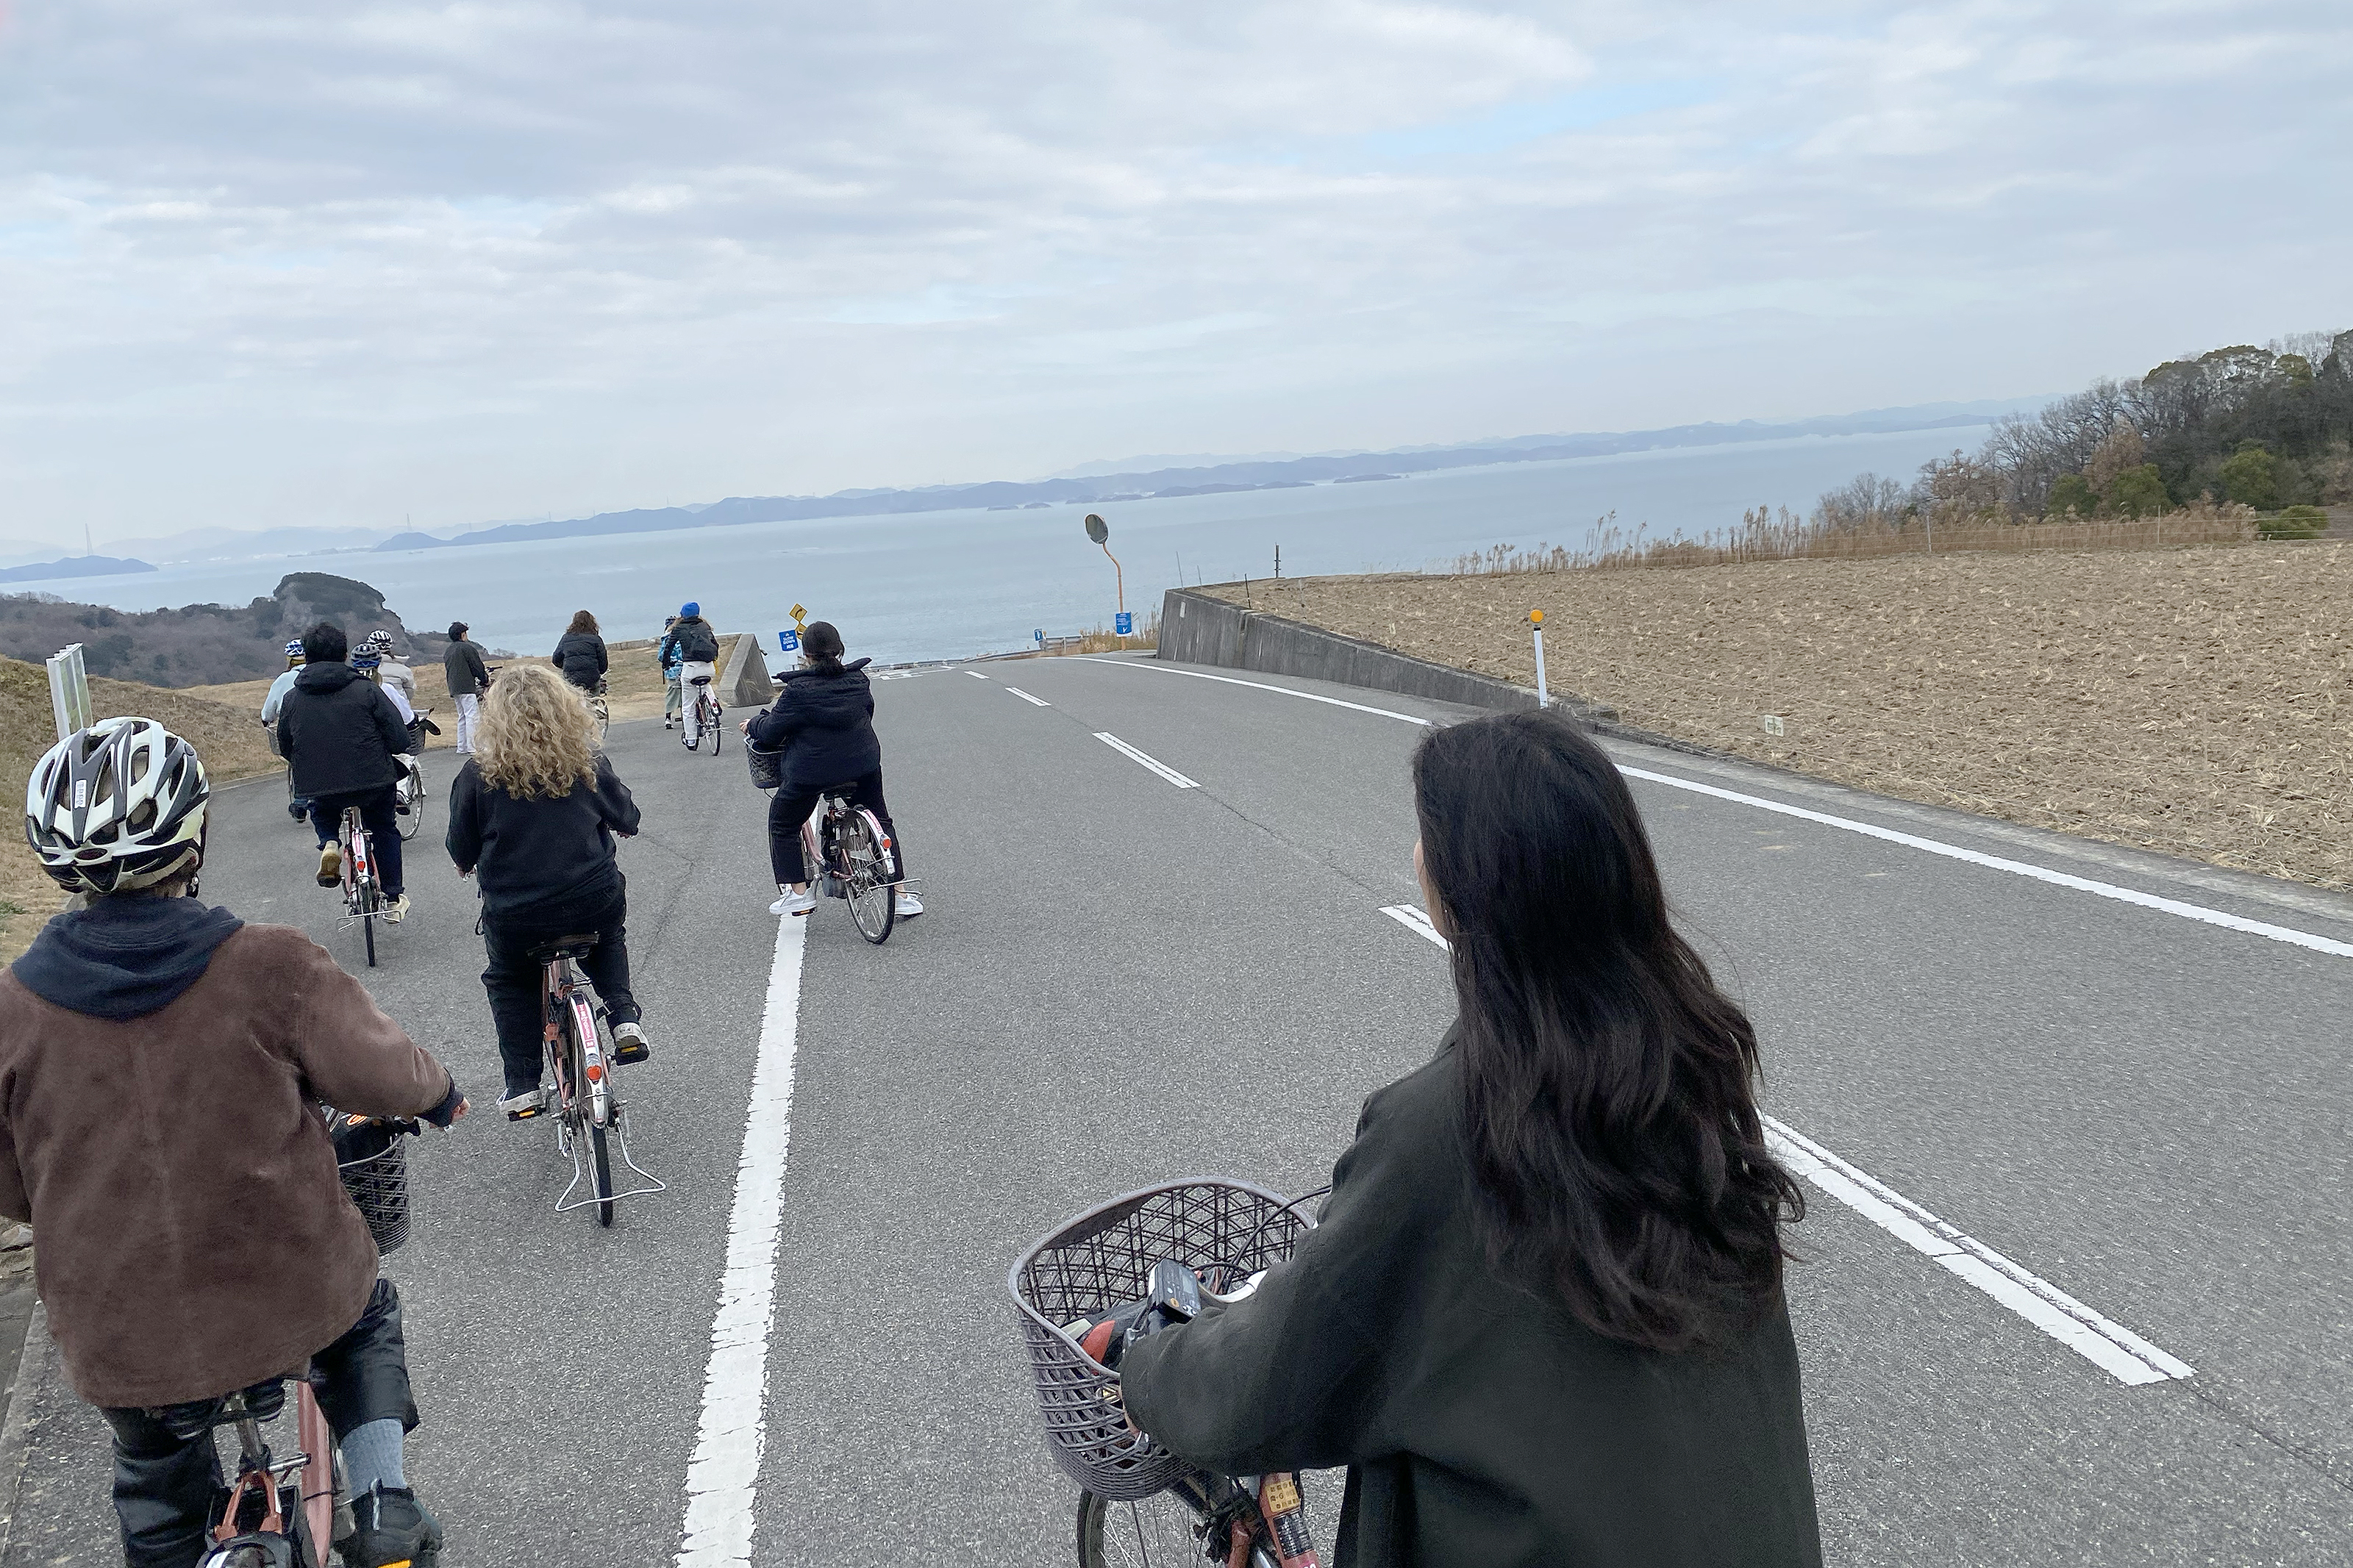 the class on a bicycle tour of Japan's art islands